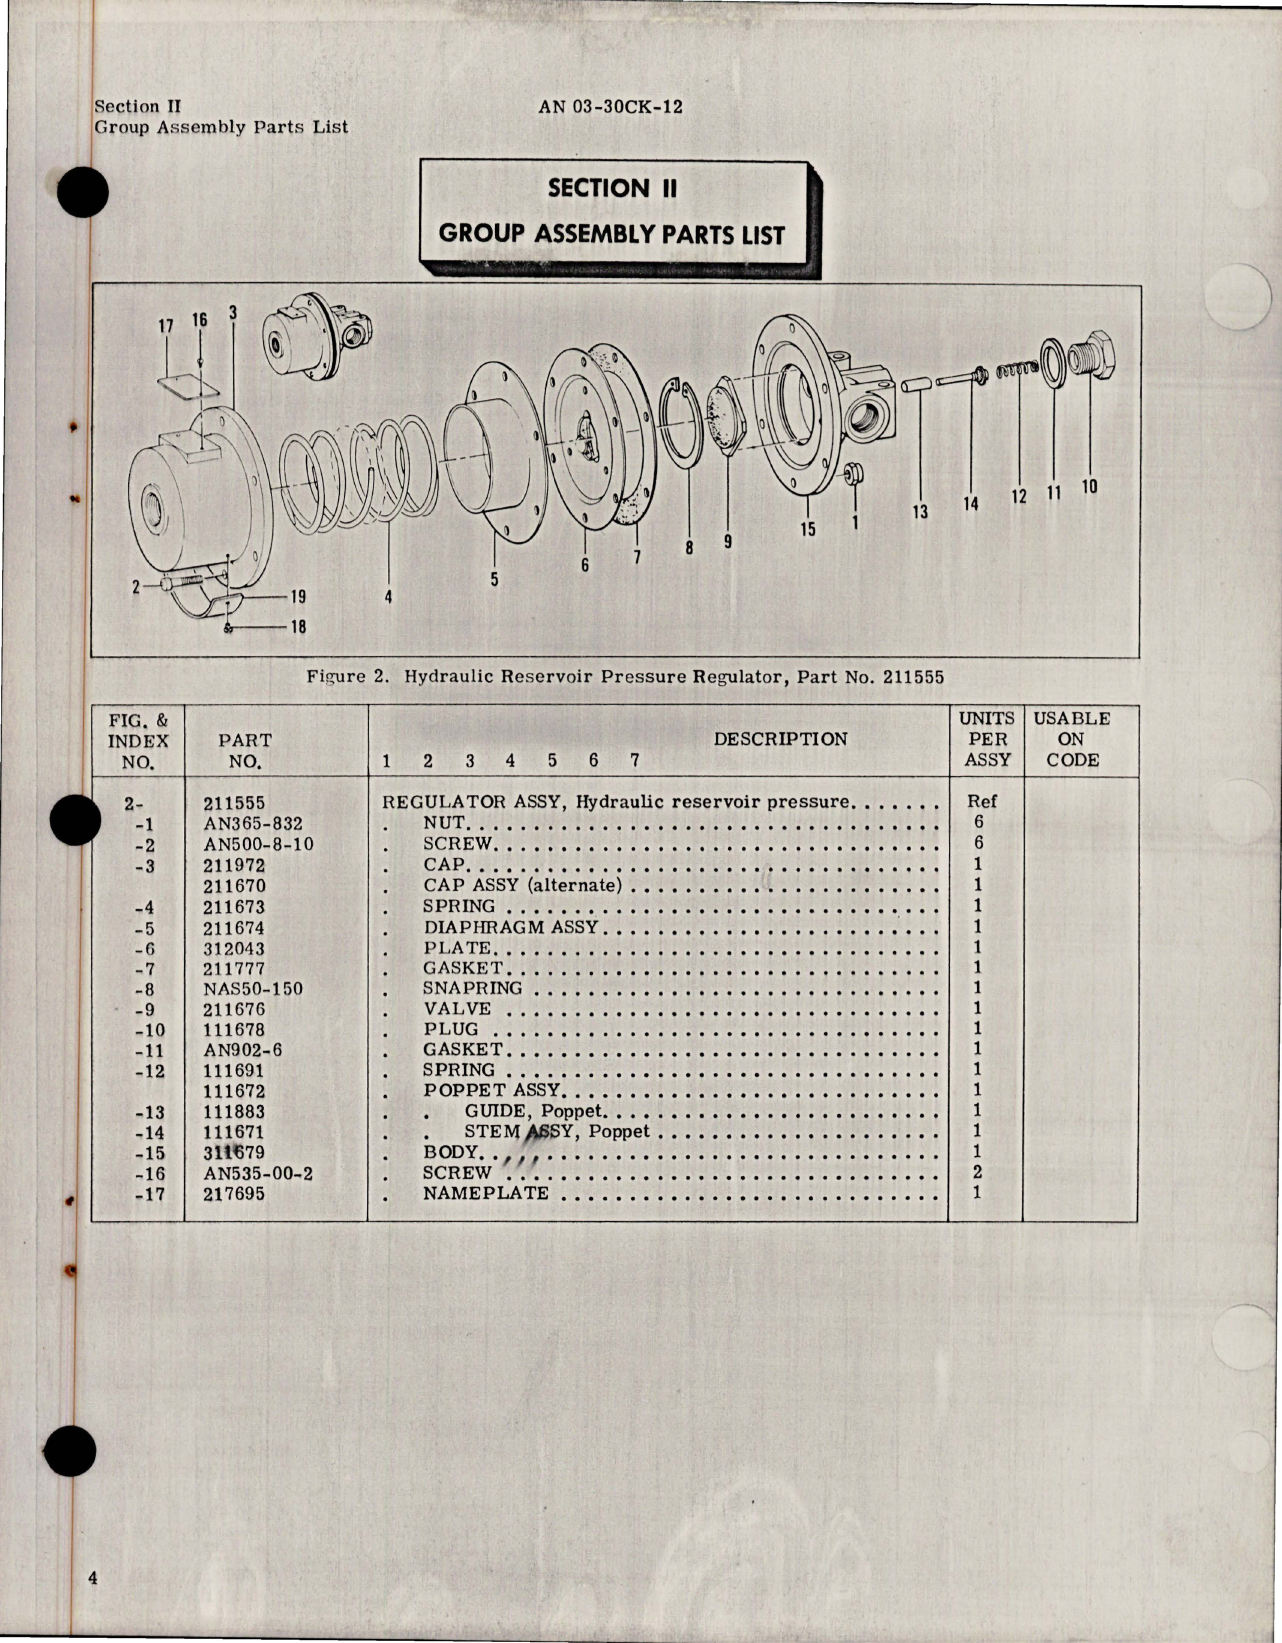 Sample page 5 from AirCorps Library document: Illustrated Parts Breakdown for Hydraulic Reservoir Pressure Regulators - Parts 211555, 211697, 212470, 312525, 312735 